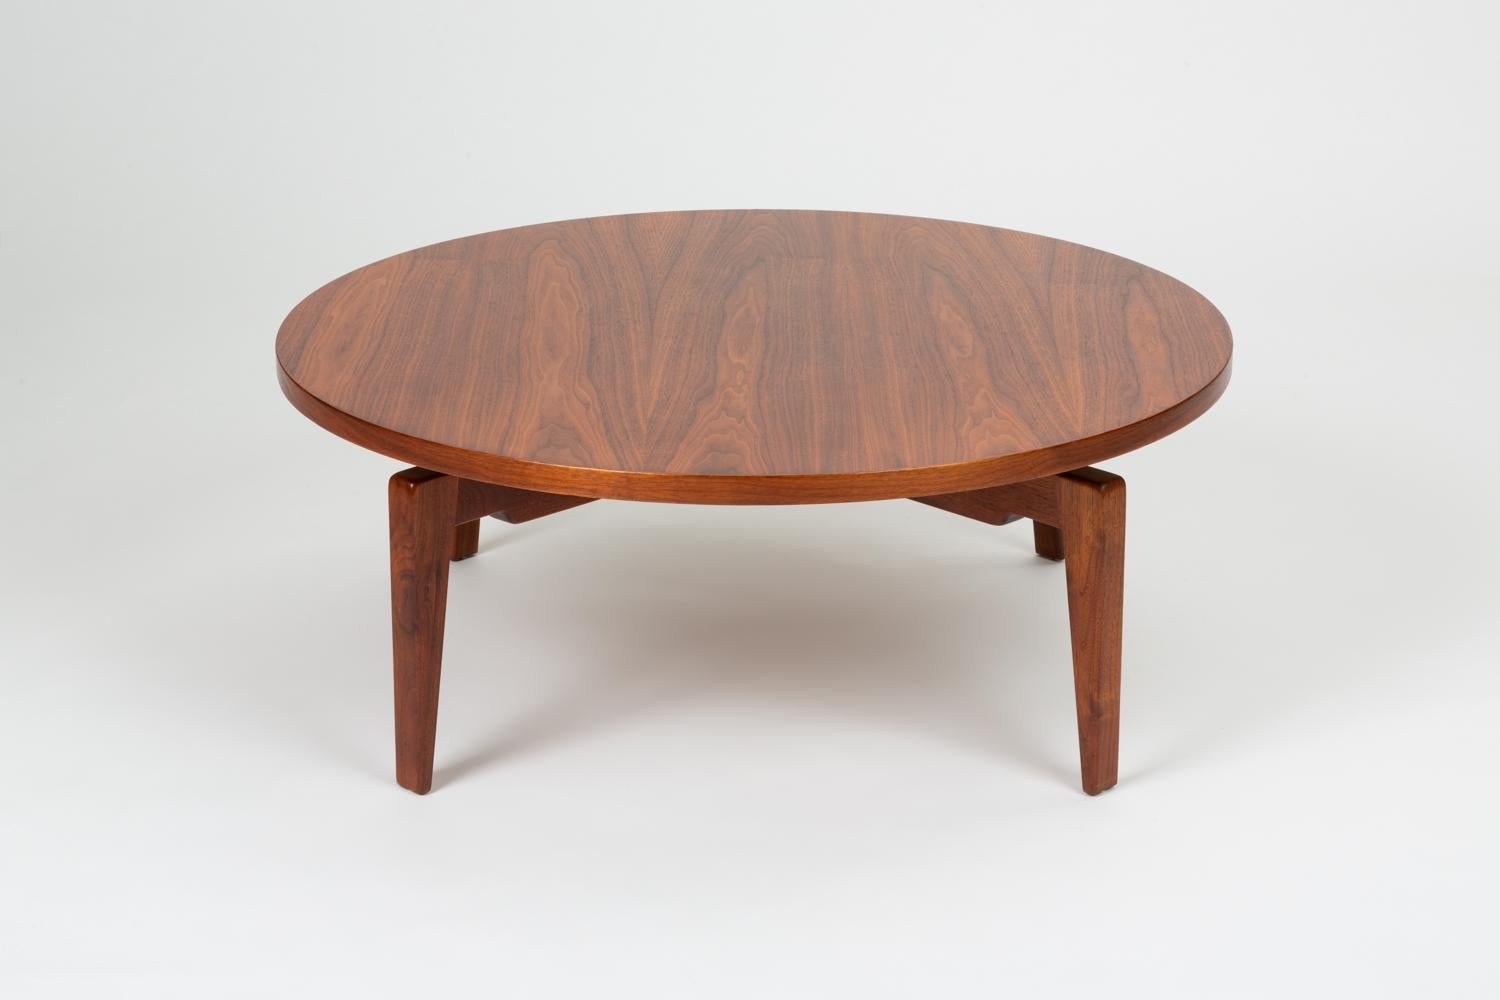 A 1958 design for a large round walnut coffee table by the Danish-American Jens Risom for his company that rotates on a central mechanism for a “Lazy Susan” effect. There is a hidden wheel underneath the table that can be adjusted to increase